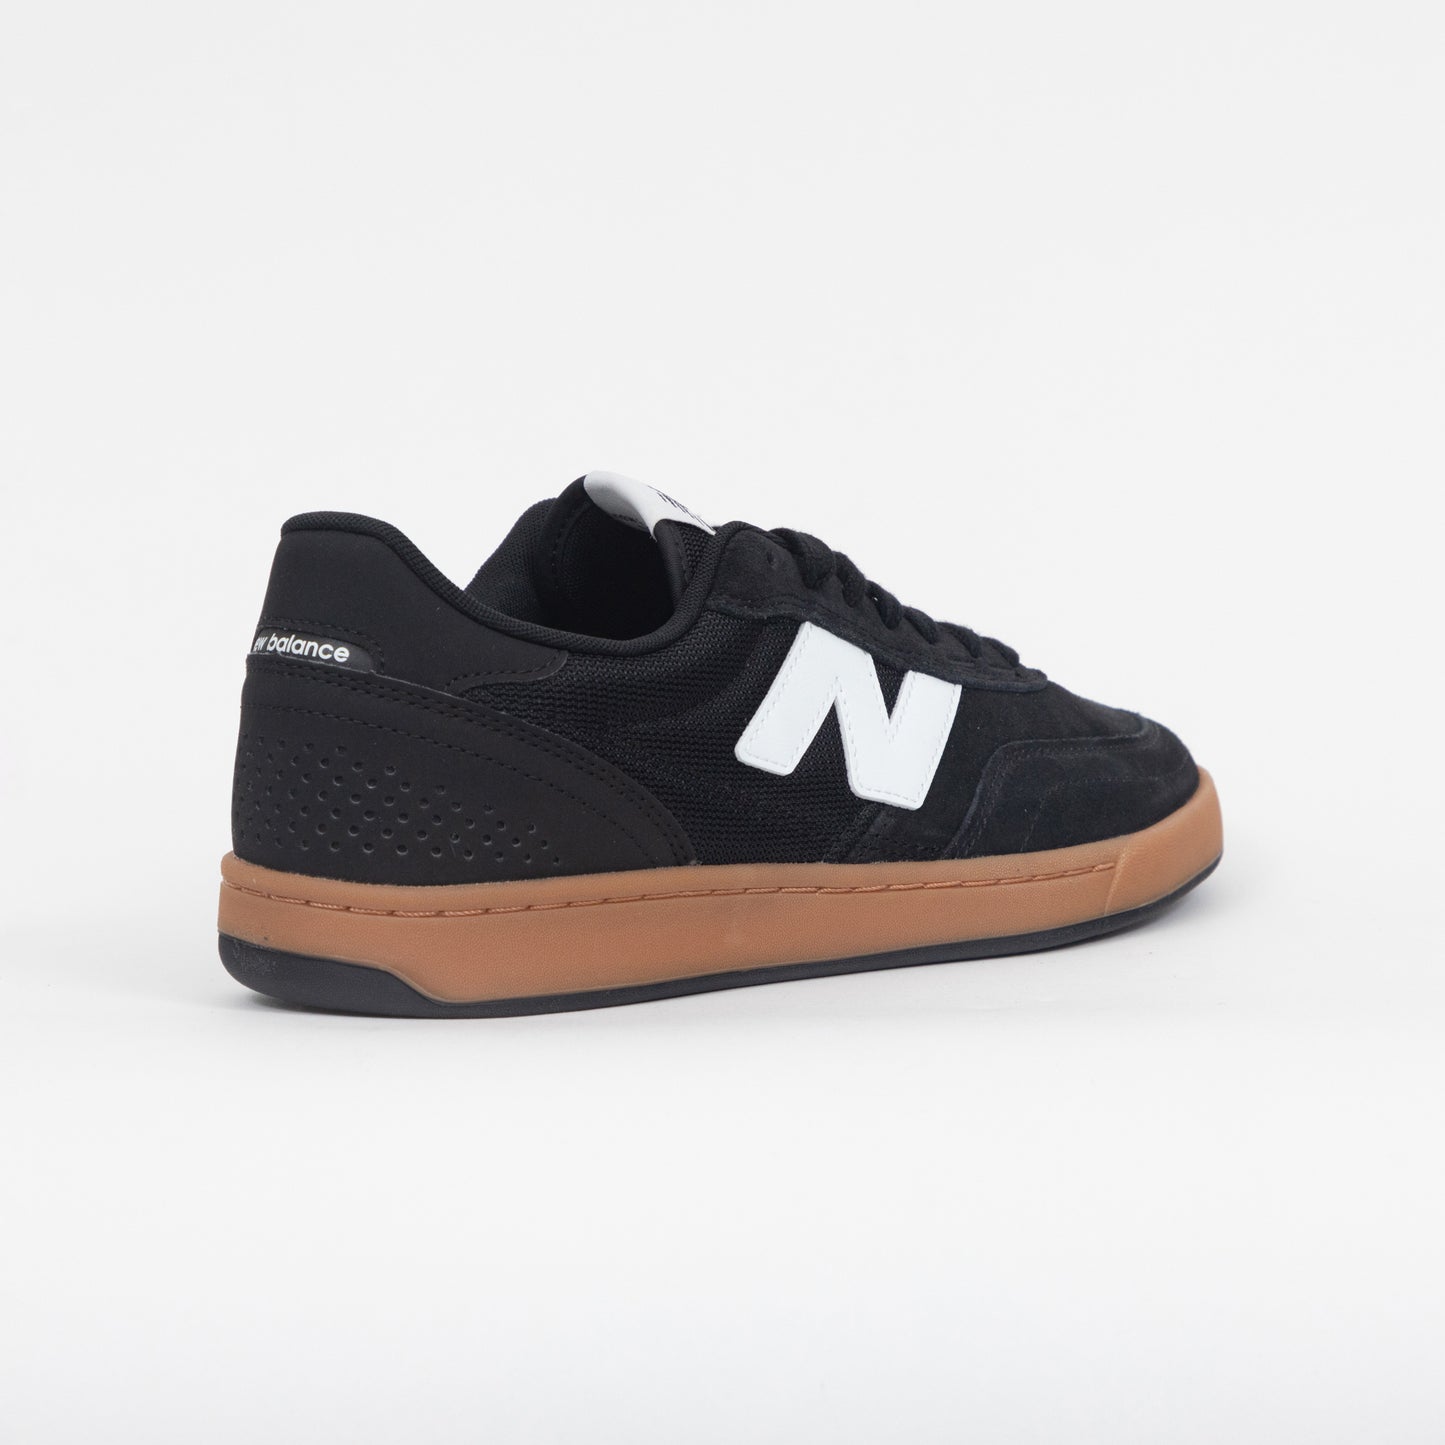 NEW BALANCE Numeric 440 V2 Trainers in BLACK